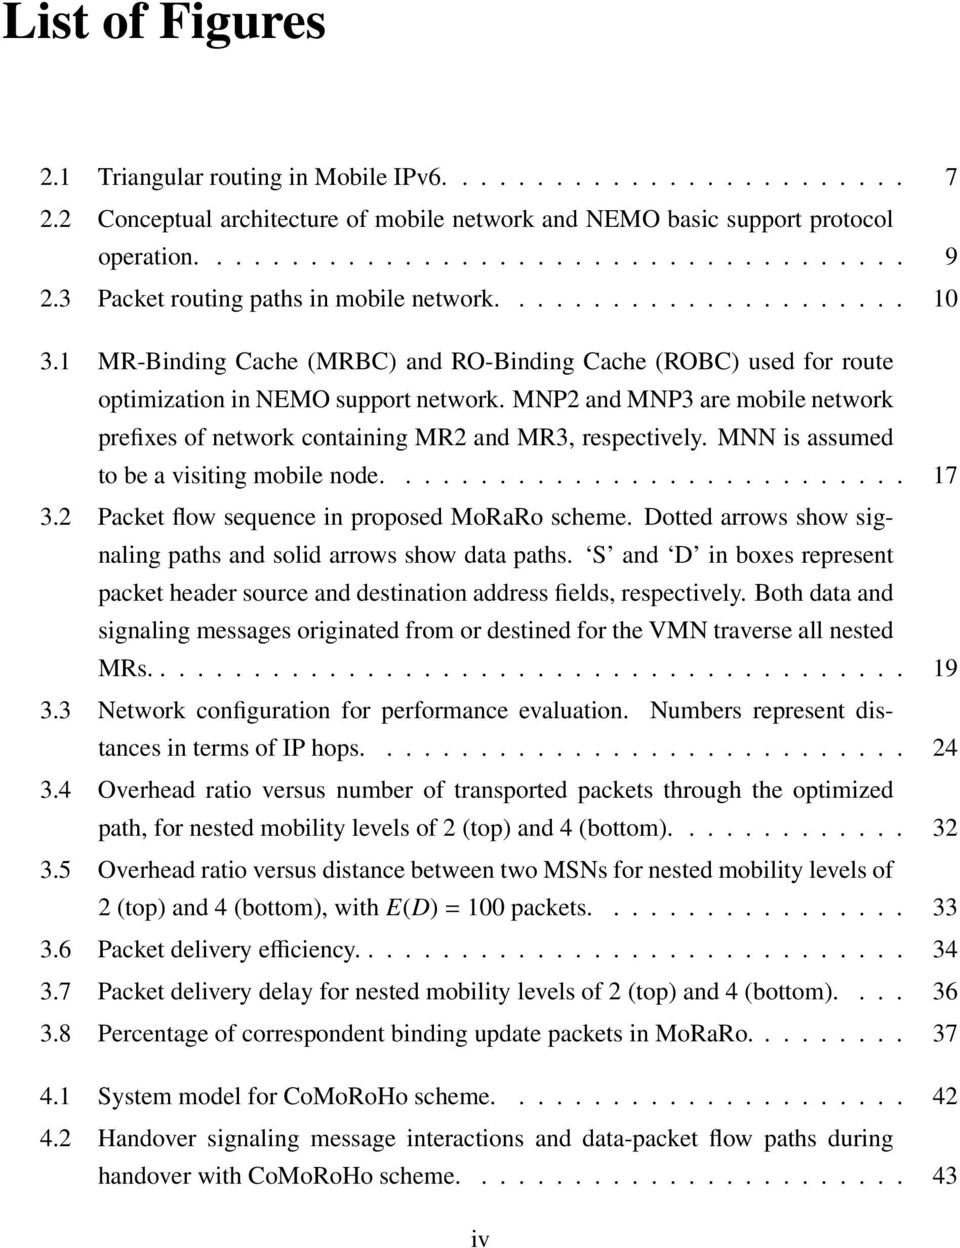 MNP2 and MNP3 are mobile network prefixes of network containing MR2 and MR3, respectively. MNN is assumed to be a visiting mobile node............................ 17 3.